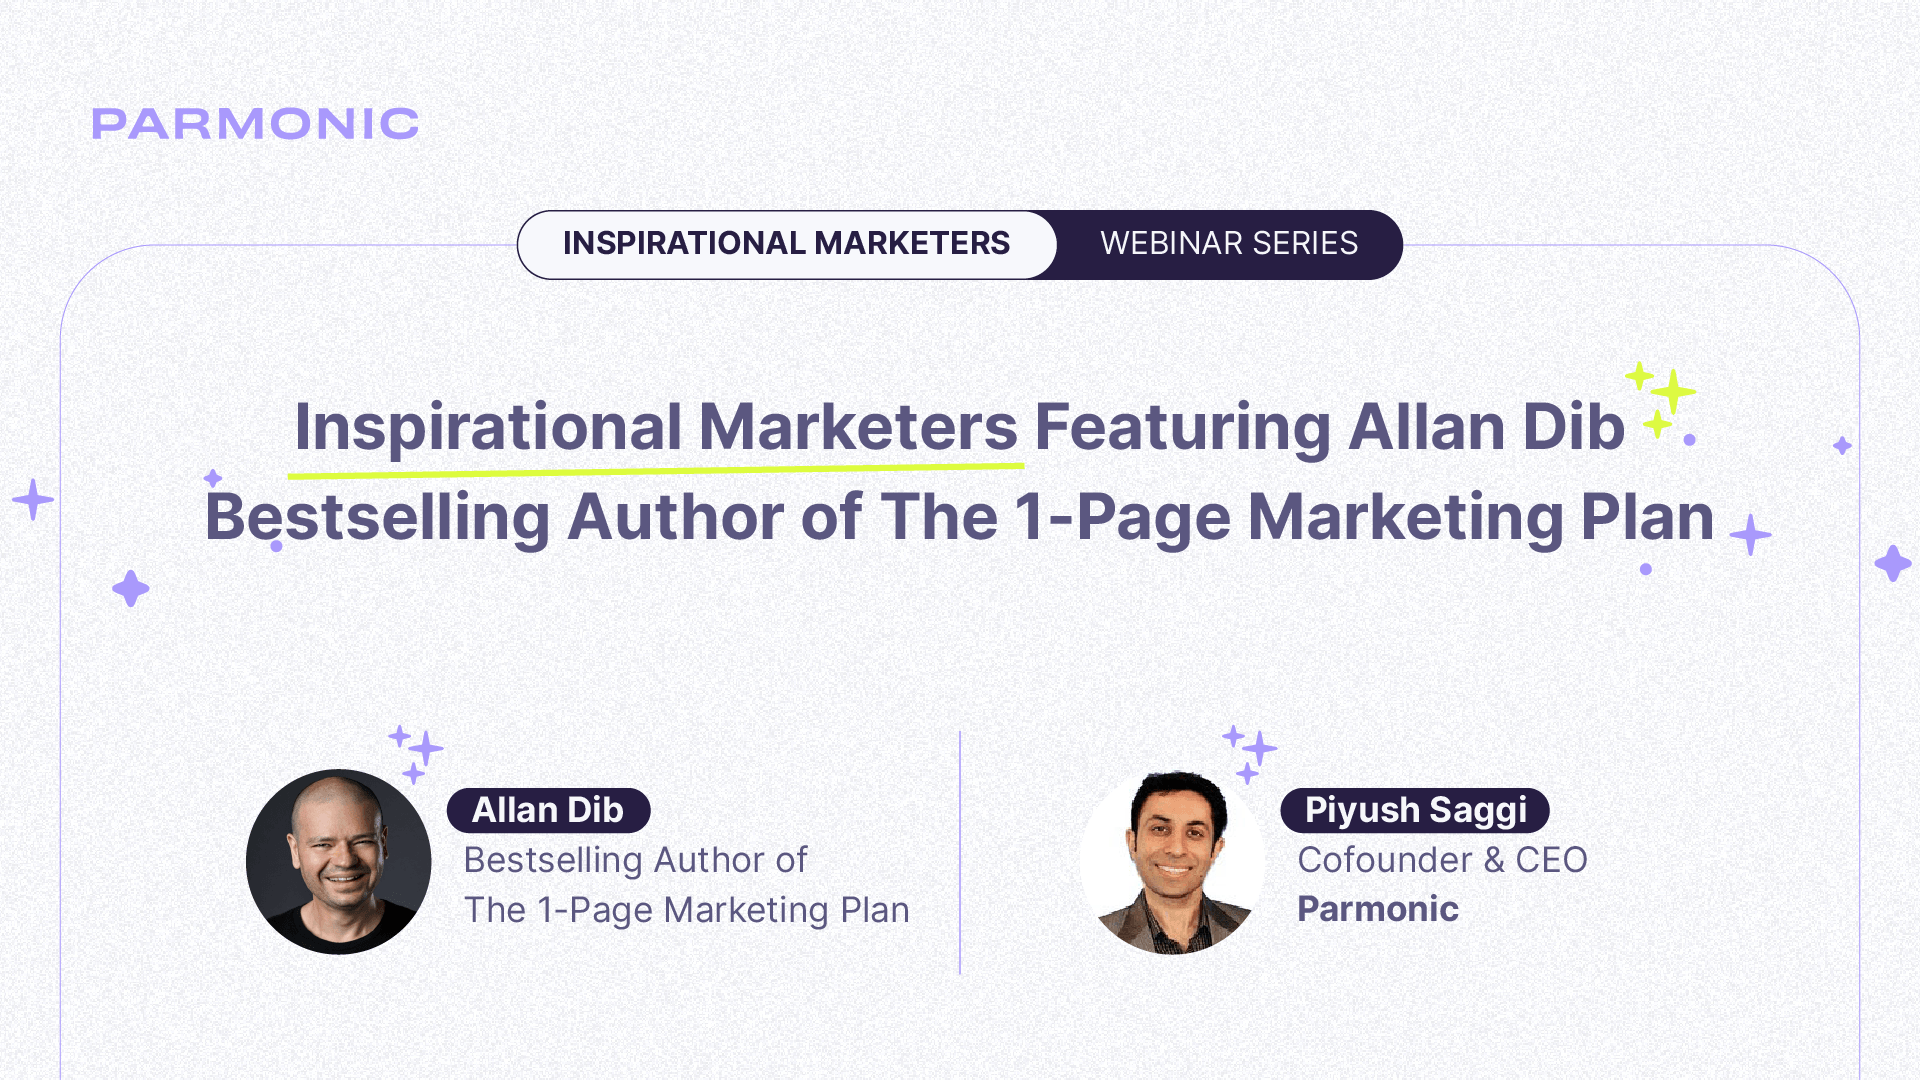 Inspirational Marketers Featuring Allan Dib, Bestselling Author of The 1-Page Marketing Plan